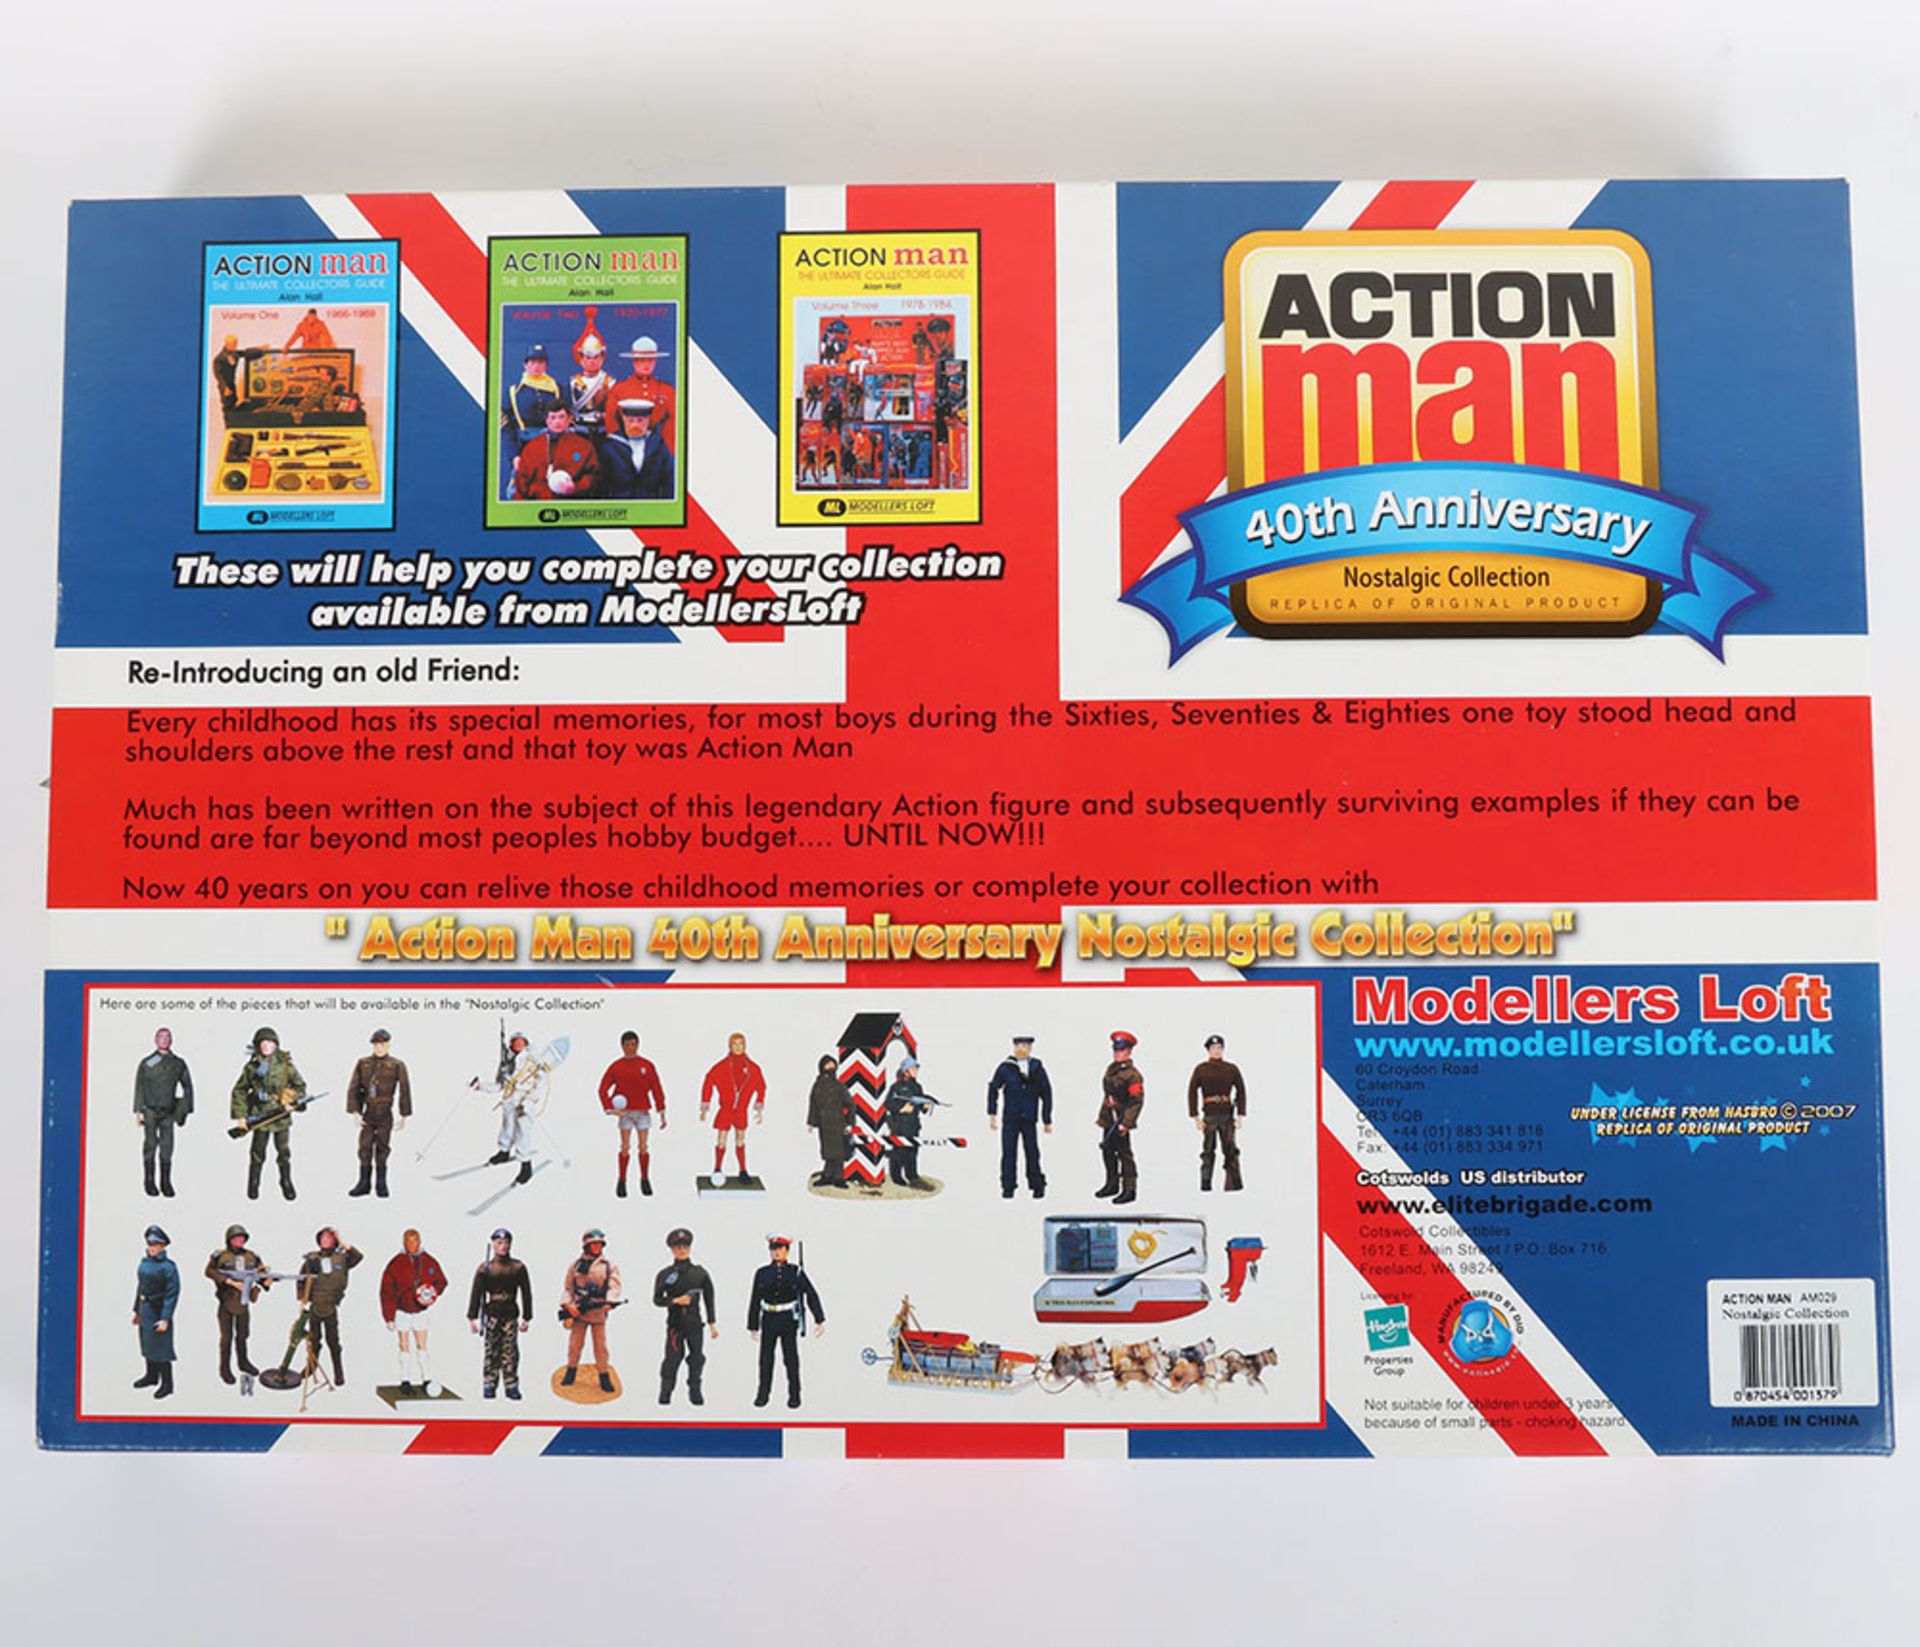 Action Man Palitoy Escape From Colditz Set 40th Anniversary Nostalgic Collection - Image 2 of 4